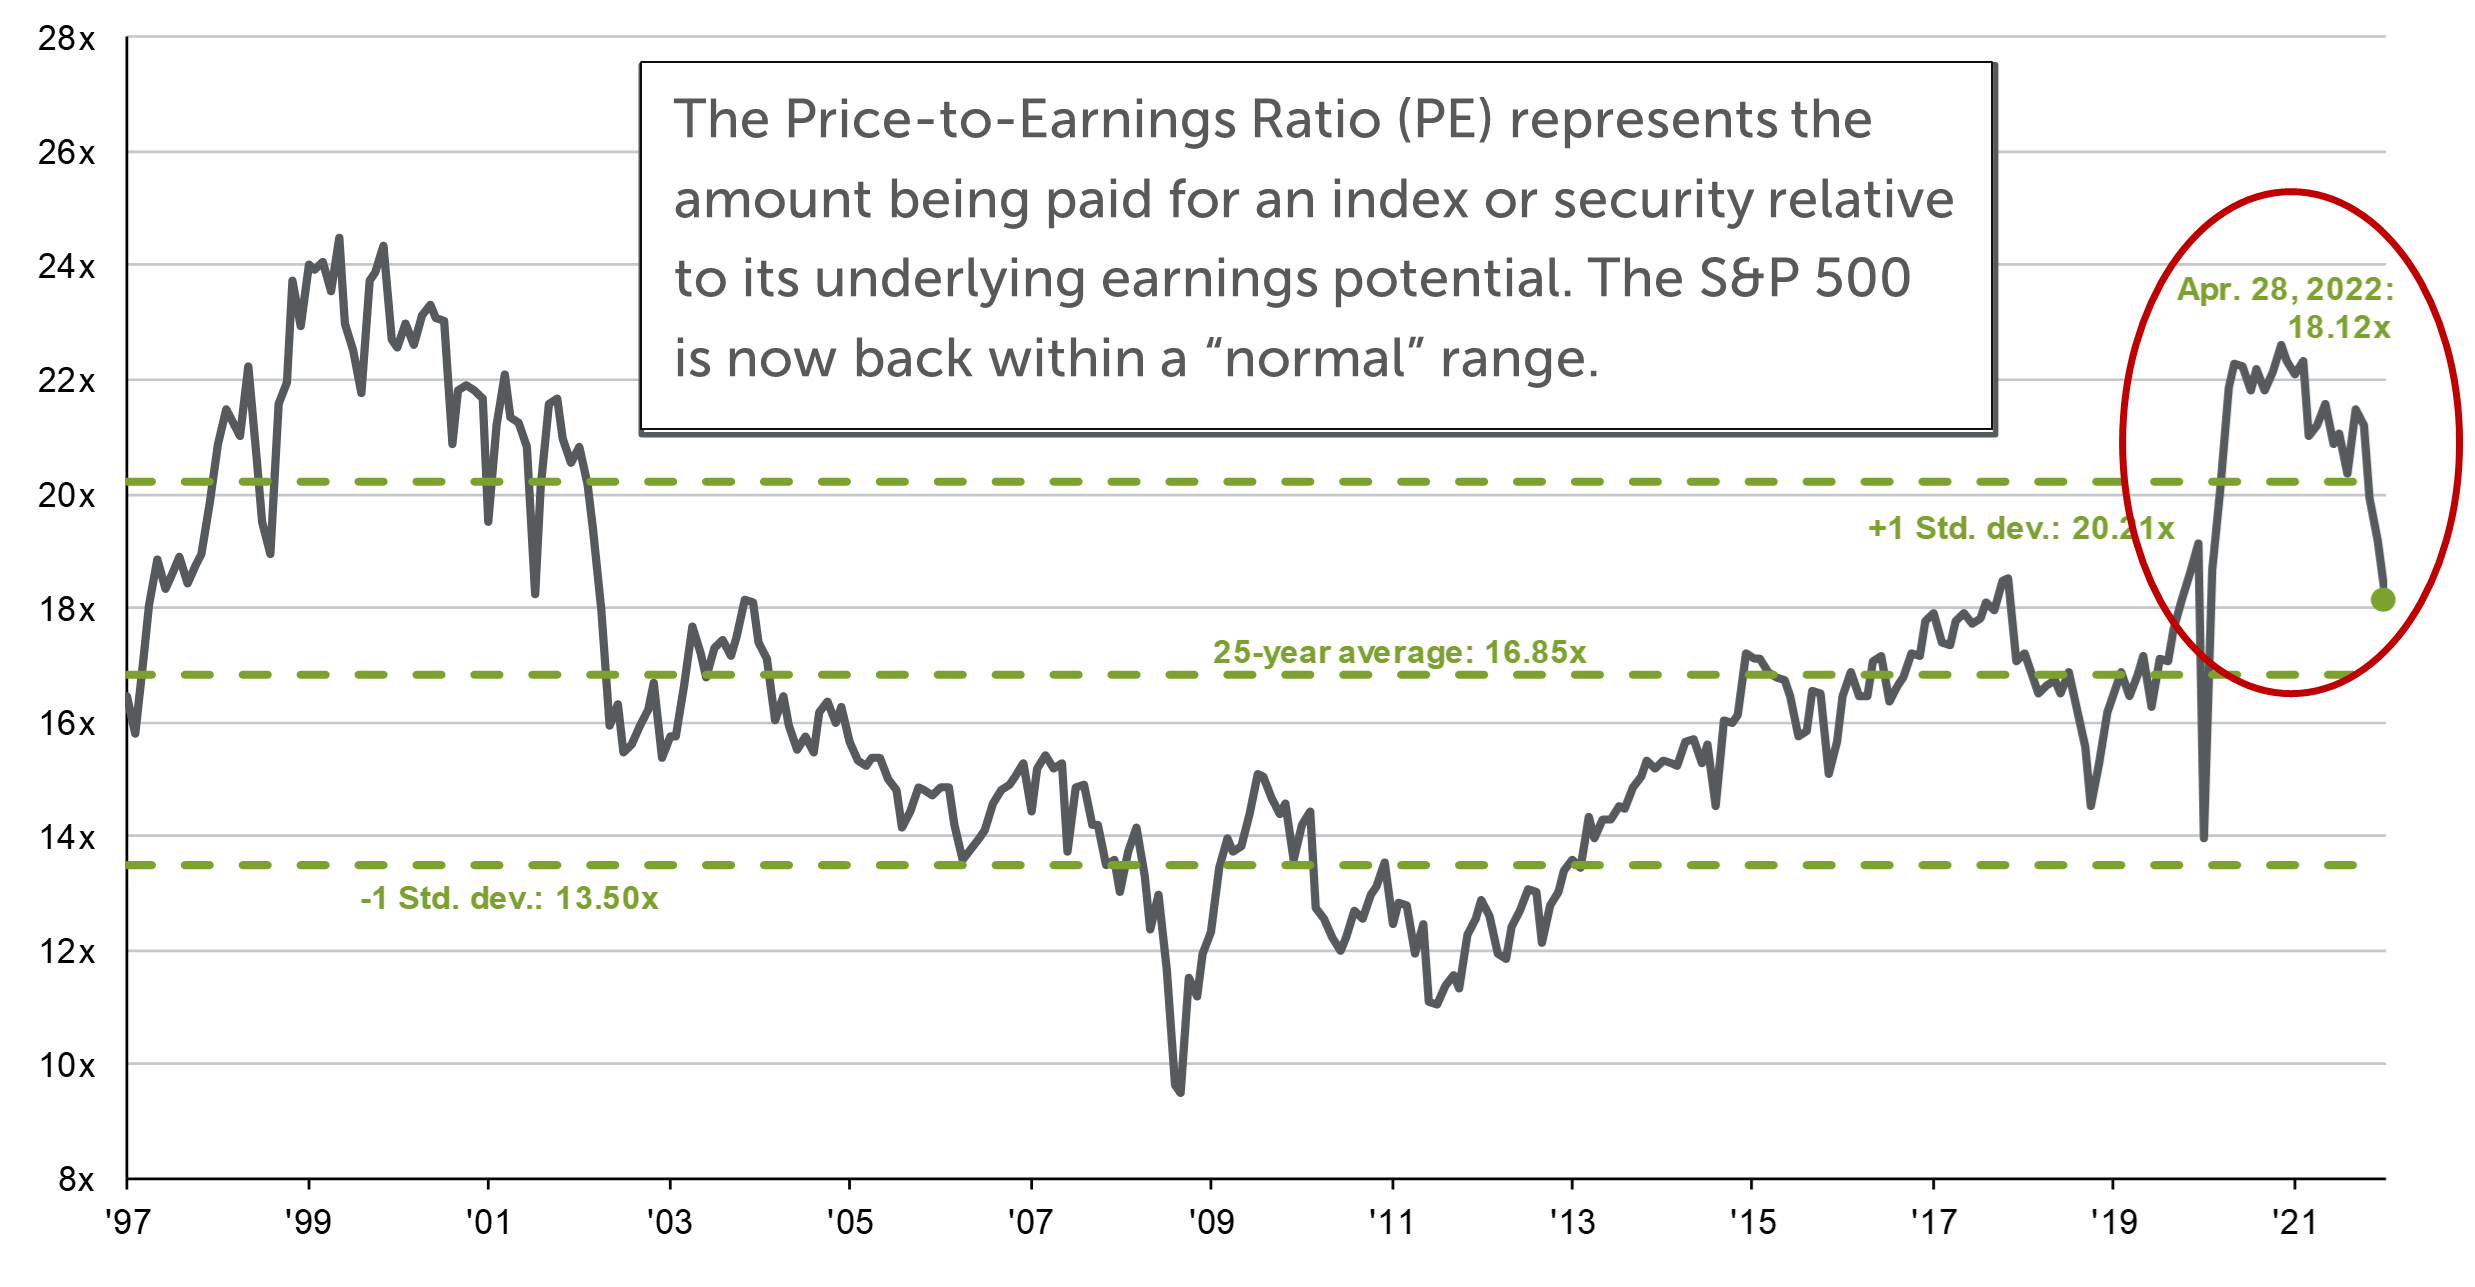 Line graph depicting S&P 500 Price-to-Expected-Earnings